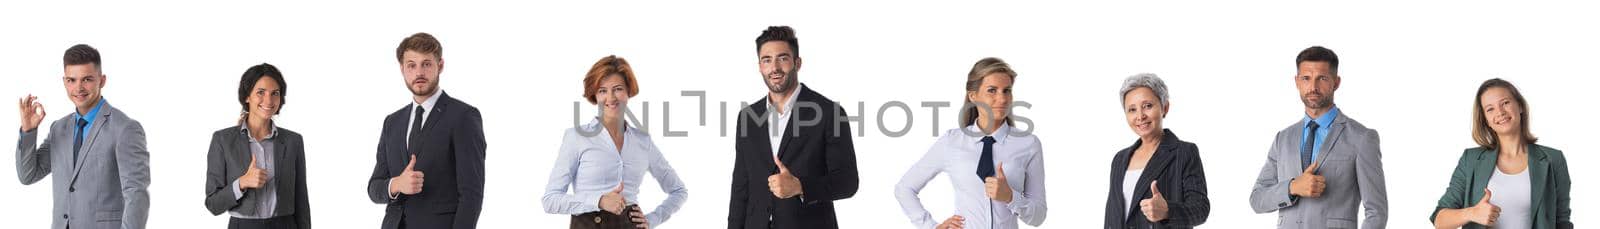 Set of various business people portraits with thumbs up studio isolated on white background